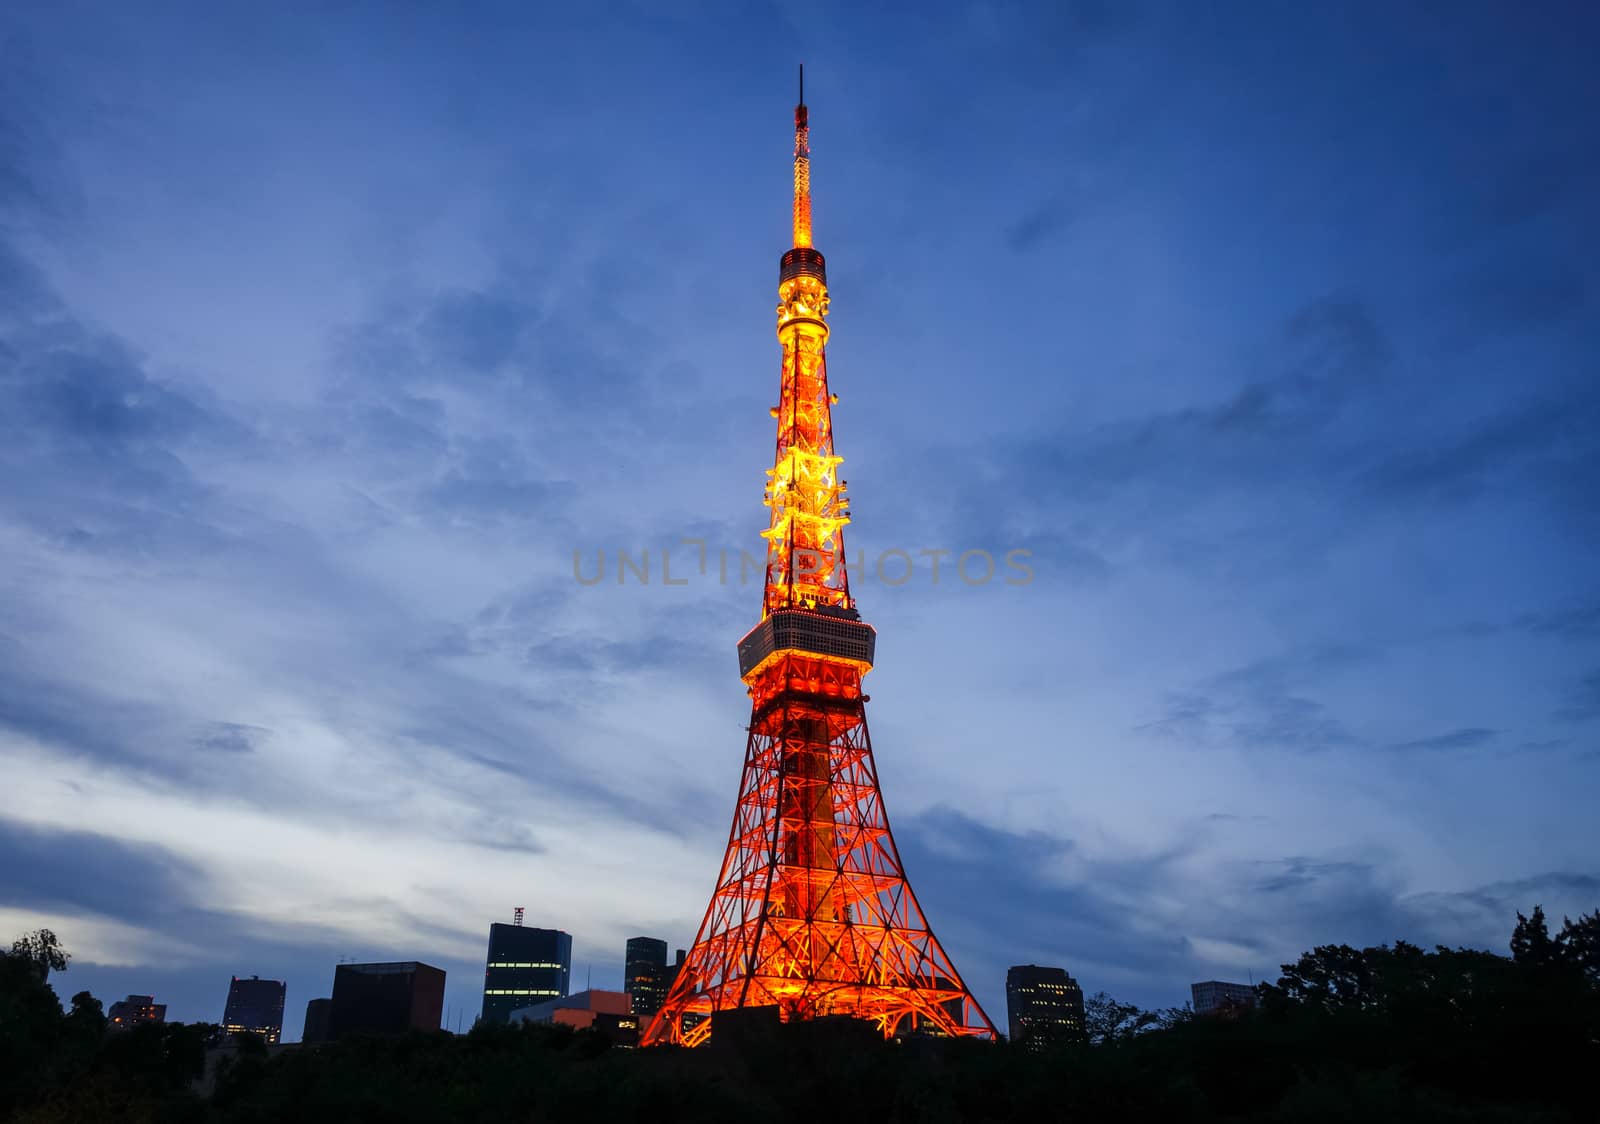 Tokyo tower at night, Japan by daboost